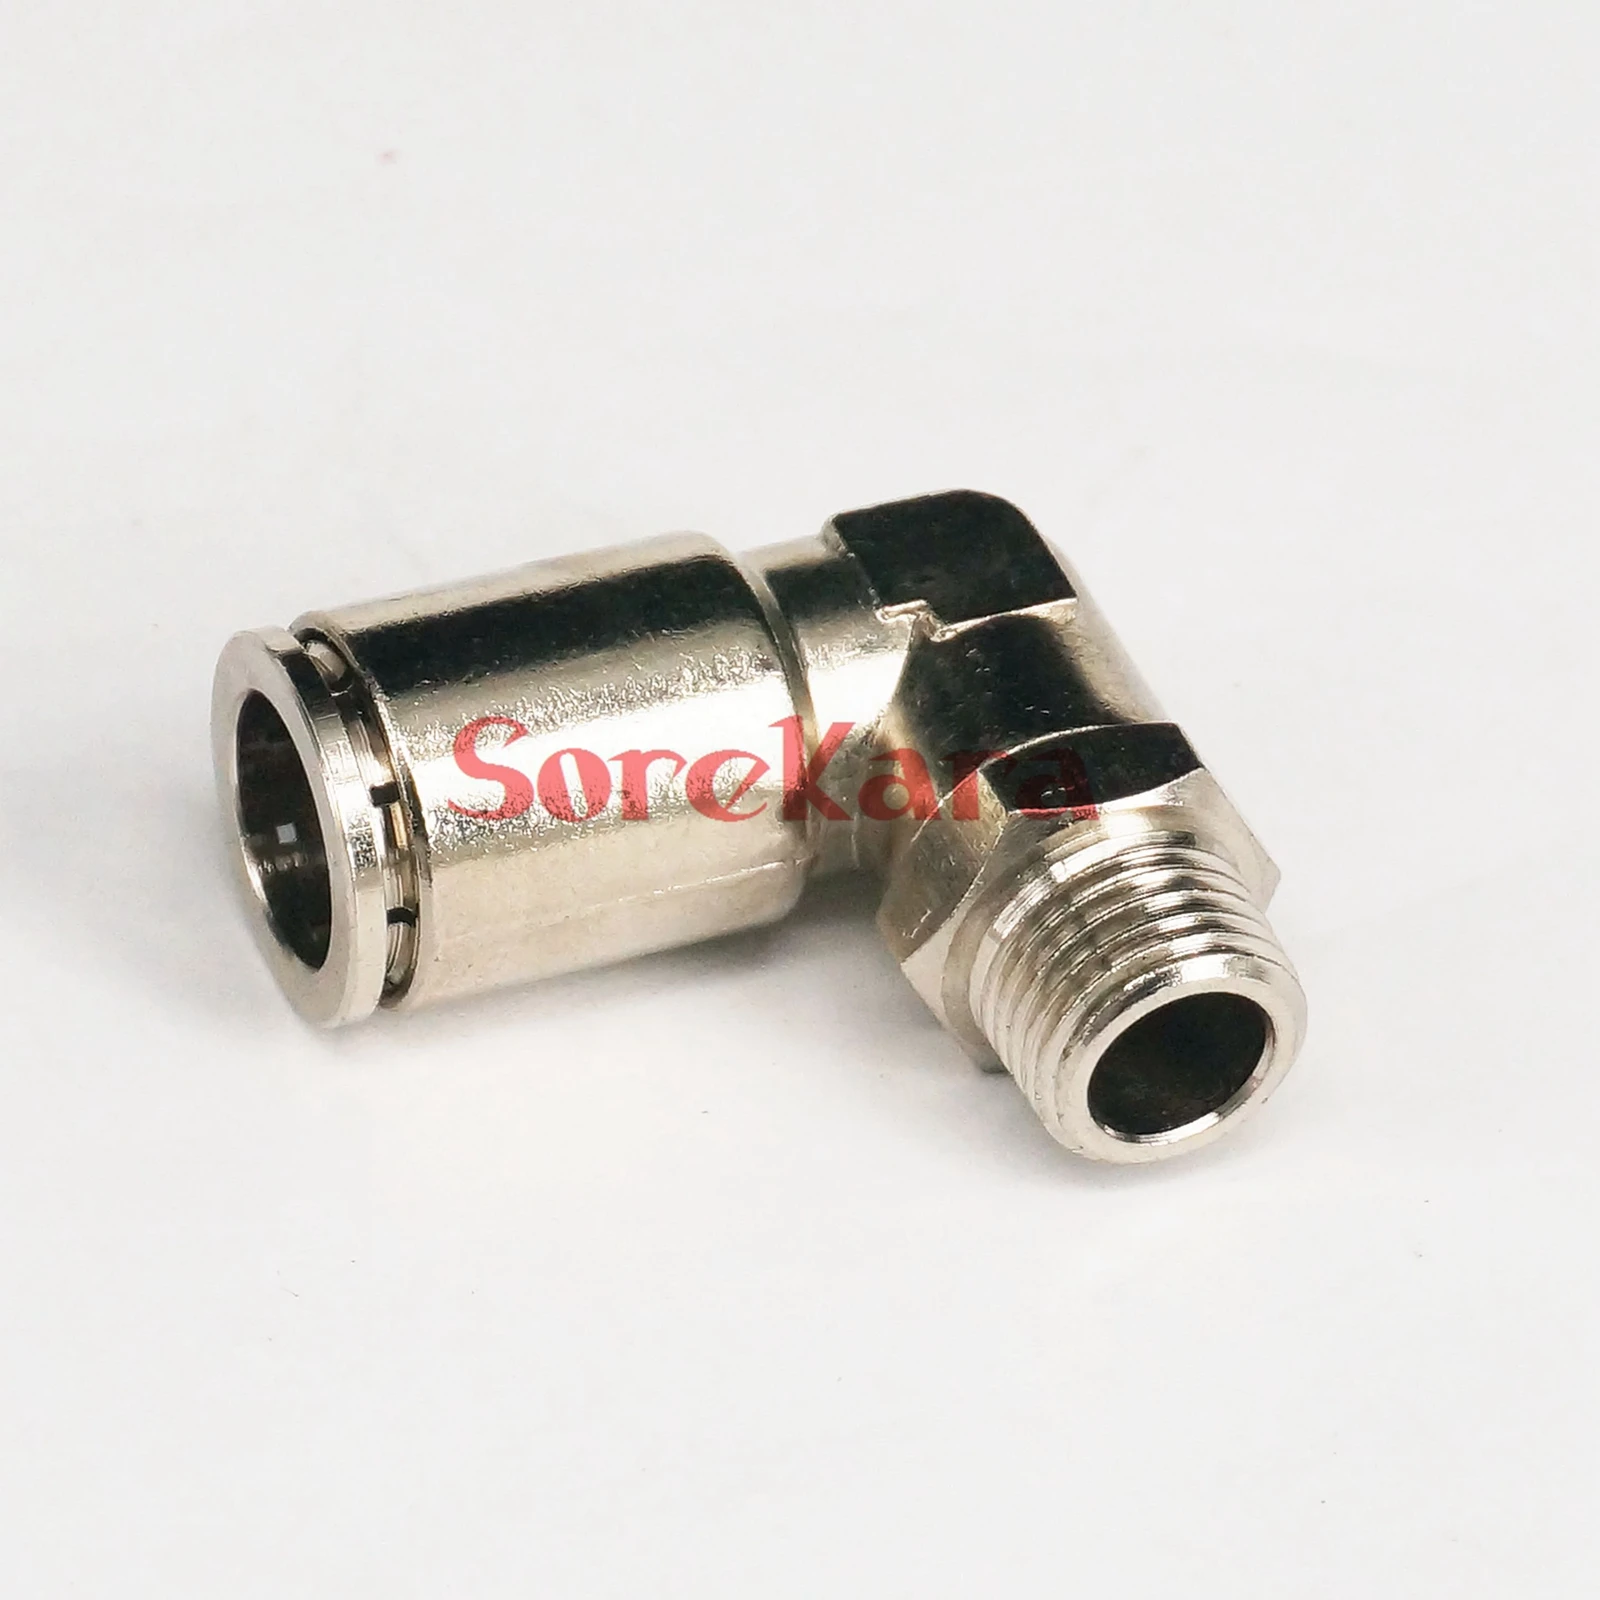 

Pneumatic Nickel Brass ELbow Push In Connector Union Quick Release Air Fitting Plumbing 1/4" BSP Male to Fit Tube O/D 12mm